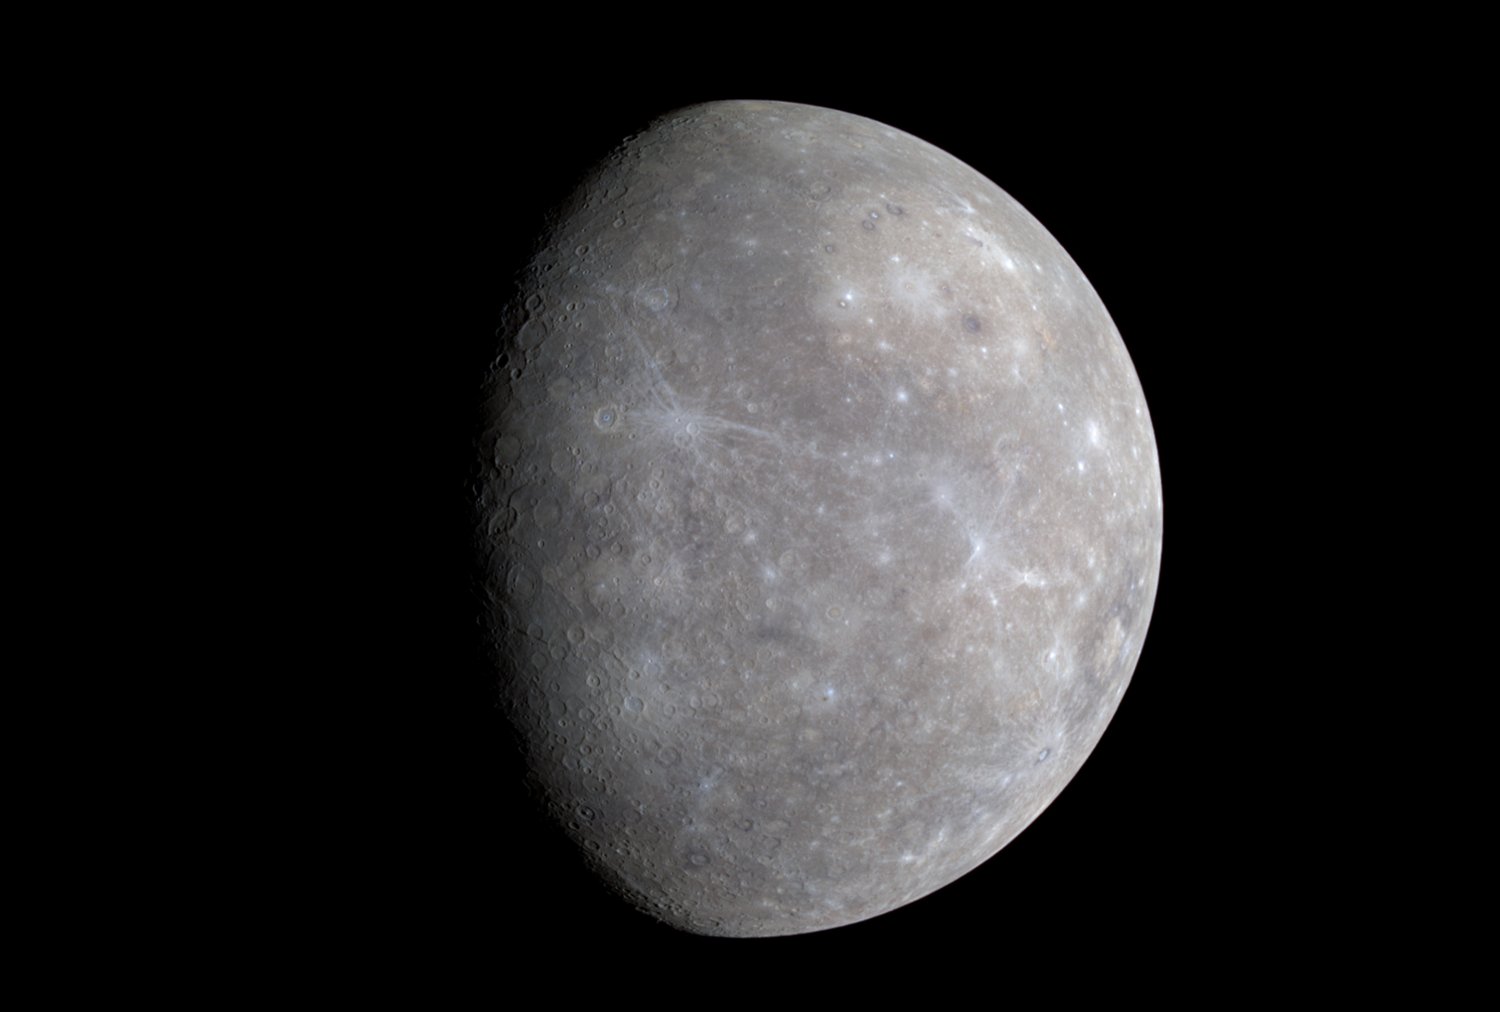 Mercury as imaged by NASA's MESSENGER spacecraft.